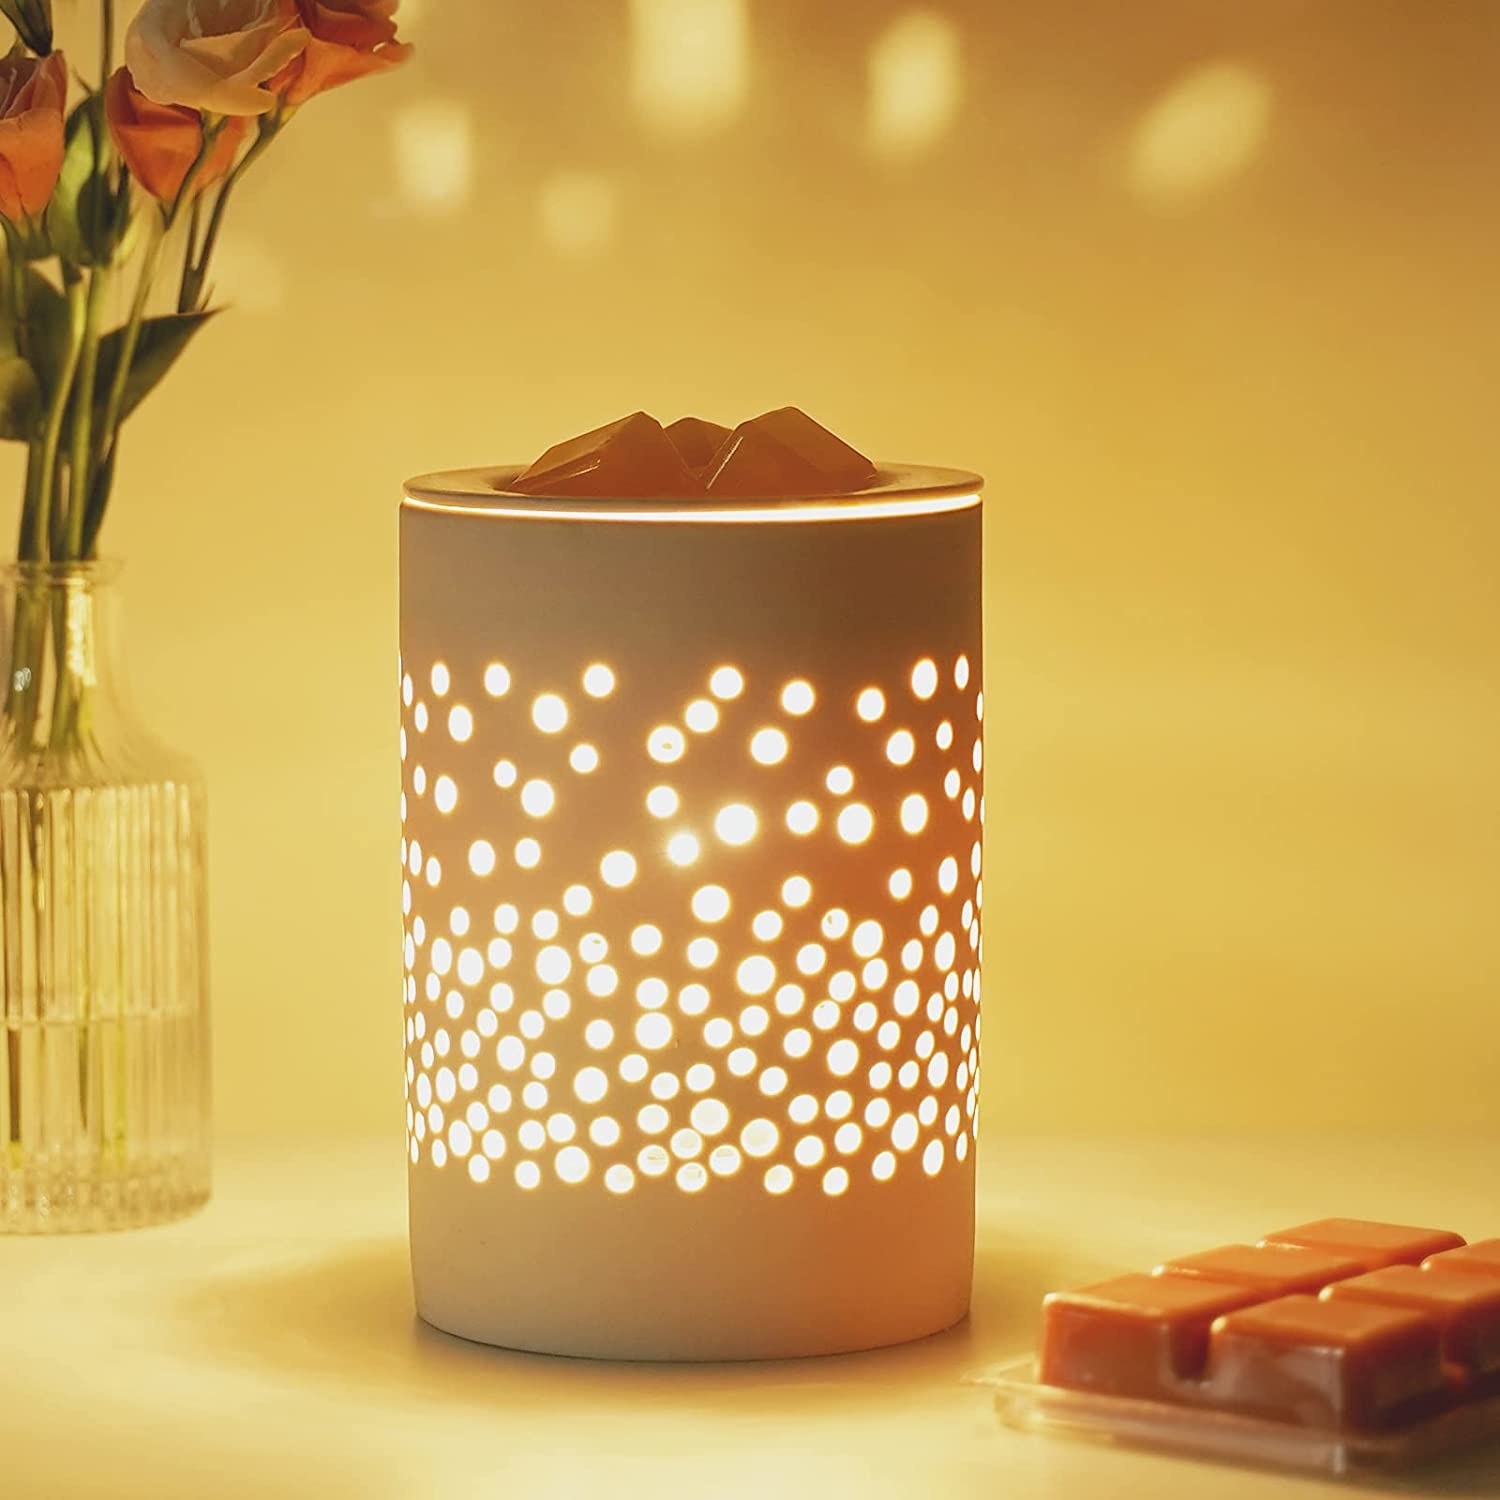 wax melter with holes in the side that let the light shine through